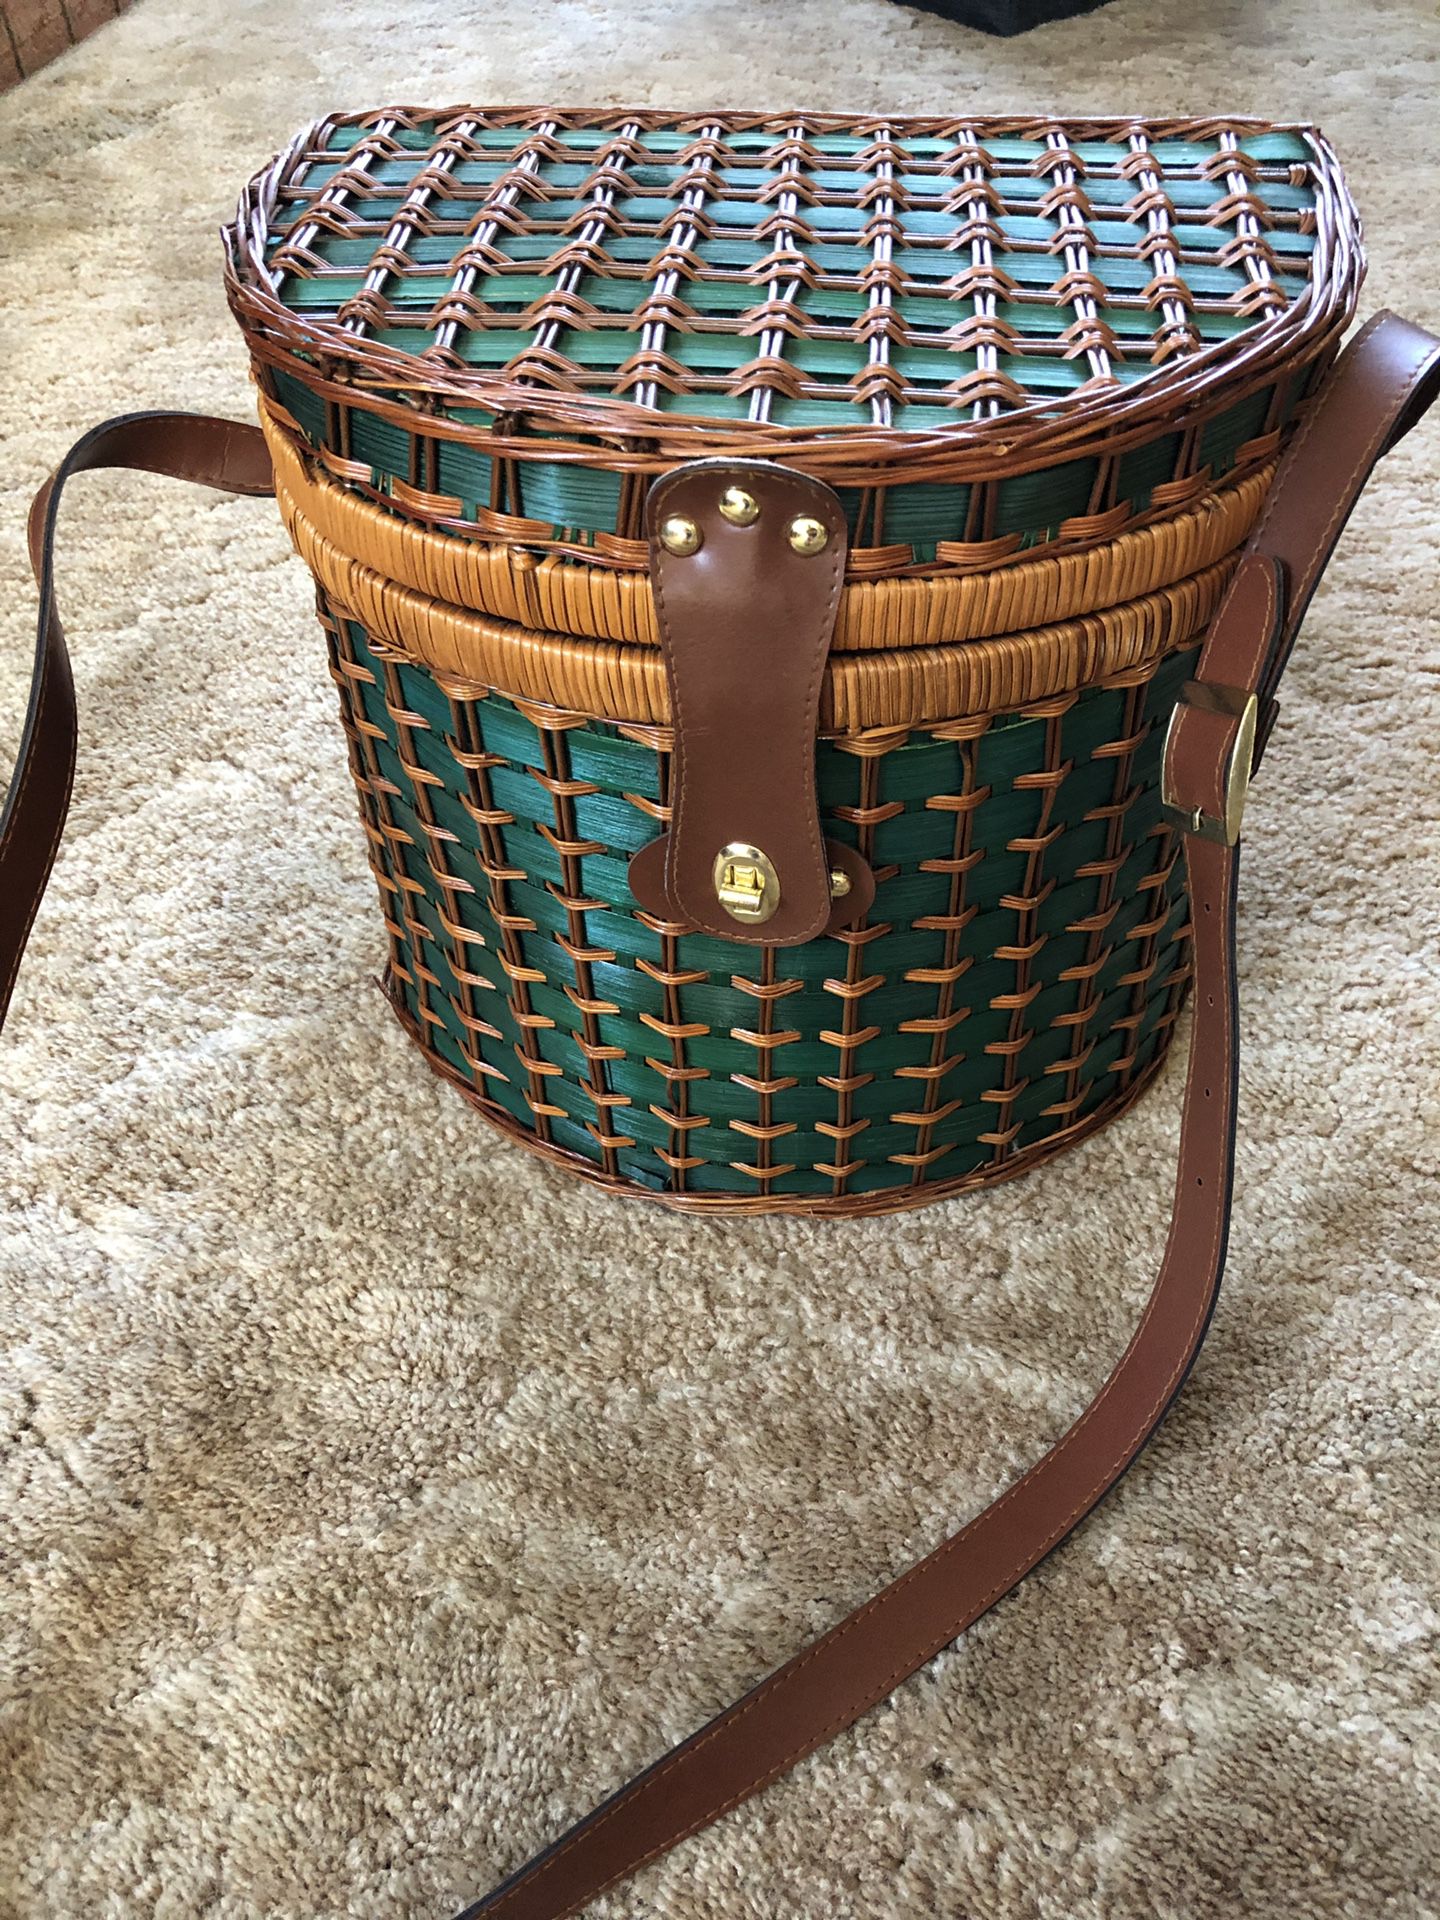 Vintage Picnic Basket with items inside included